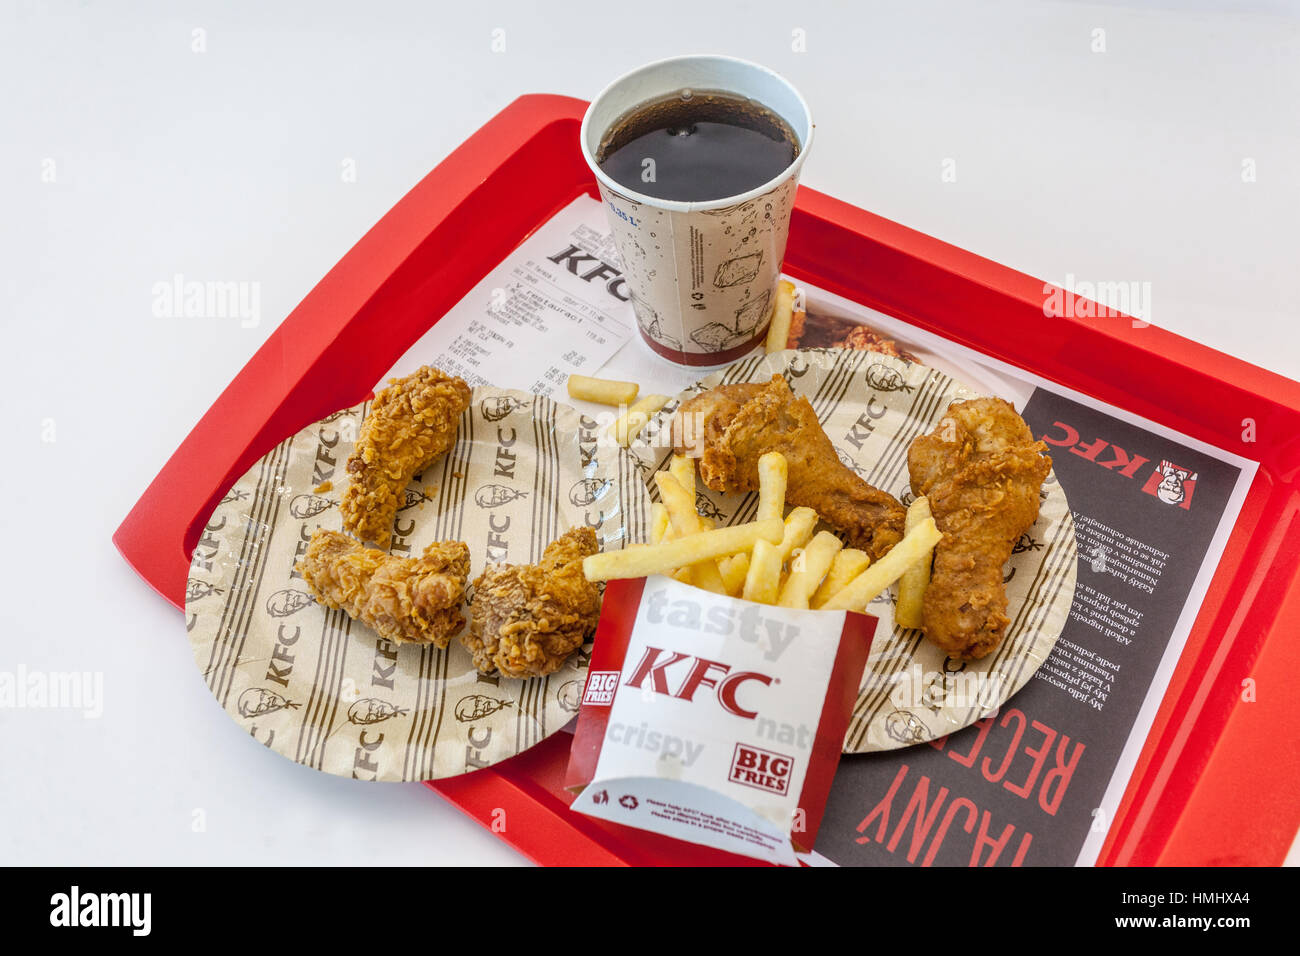 KFC meal, Kentucky Fried Chicken, French fries Stock Photo